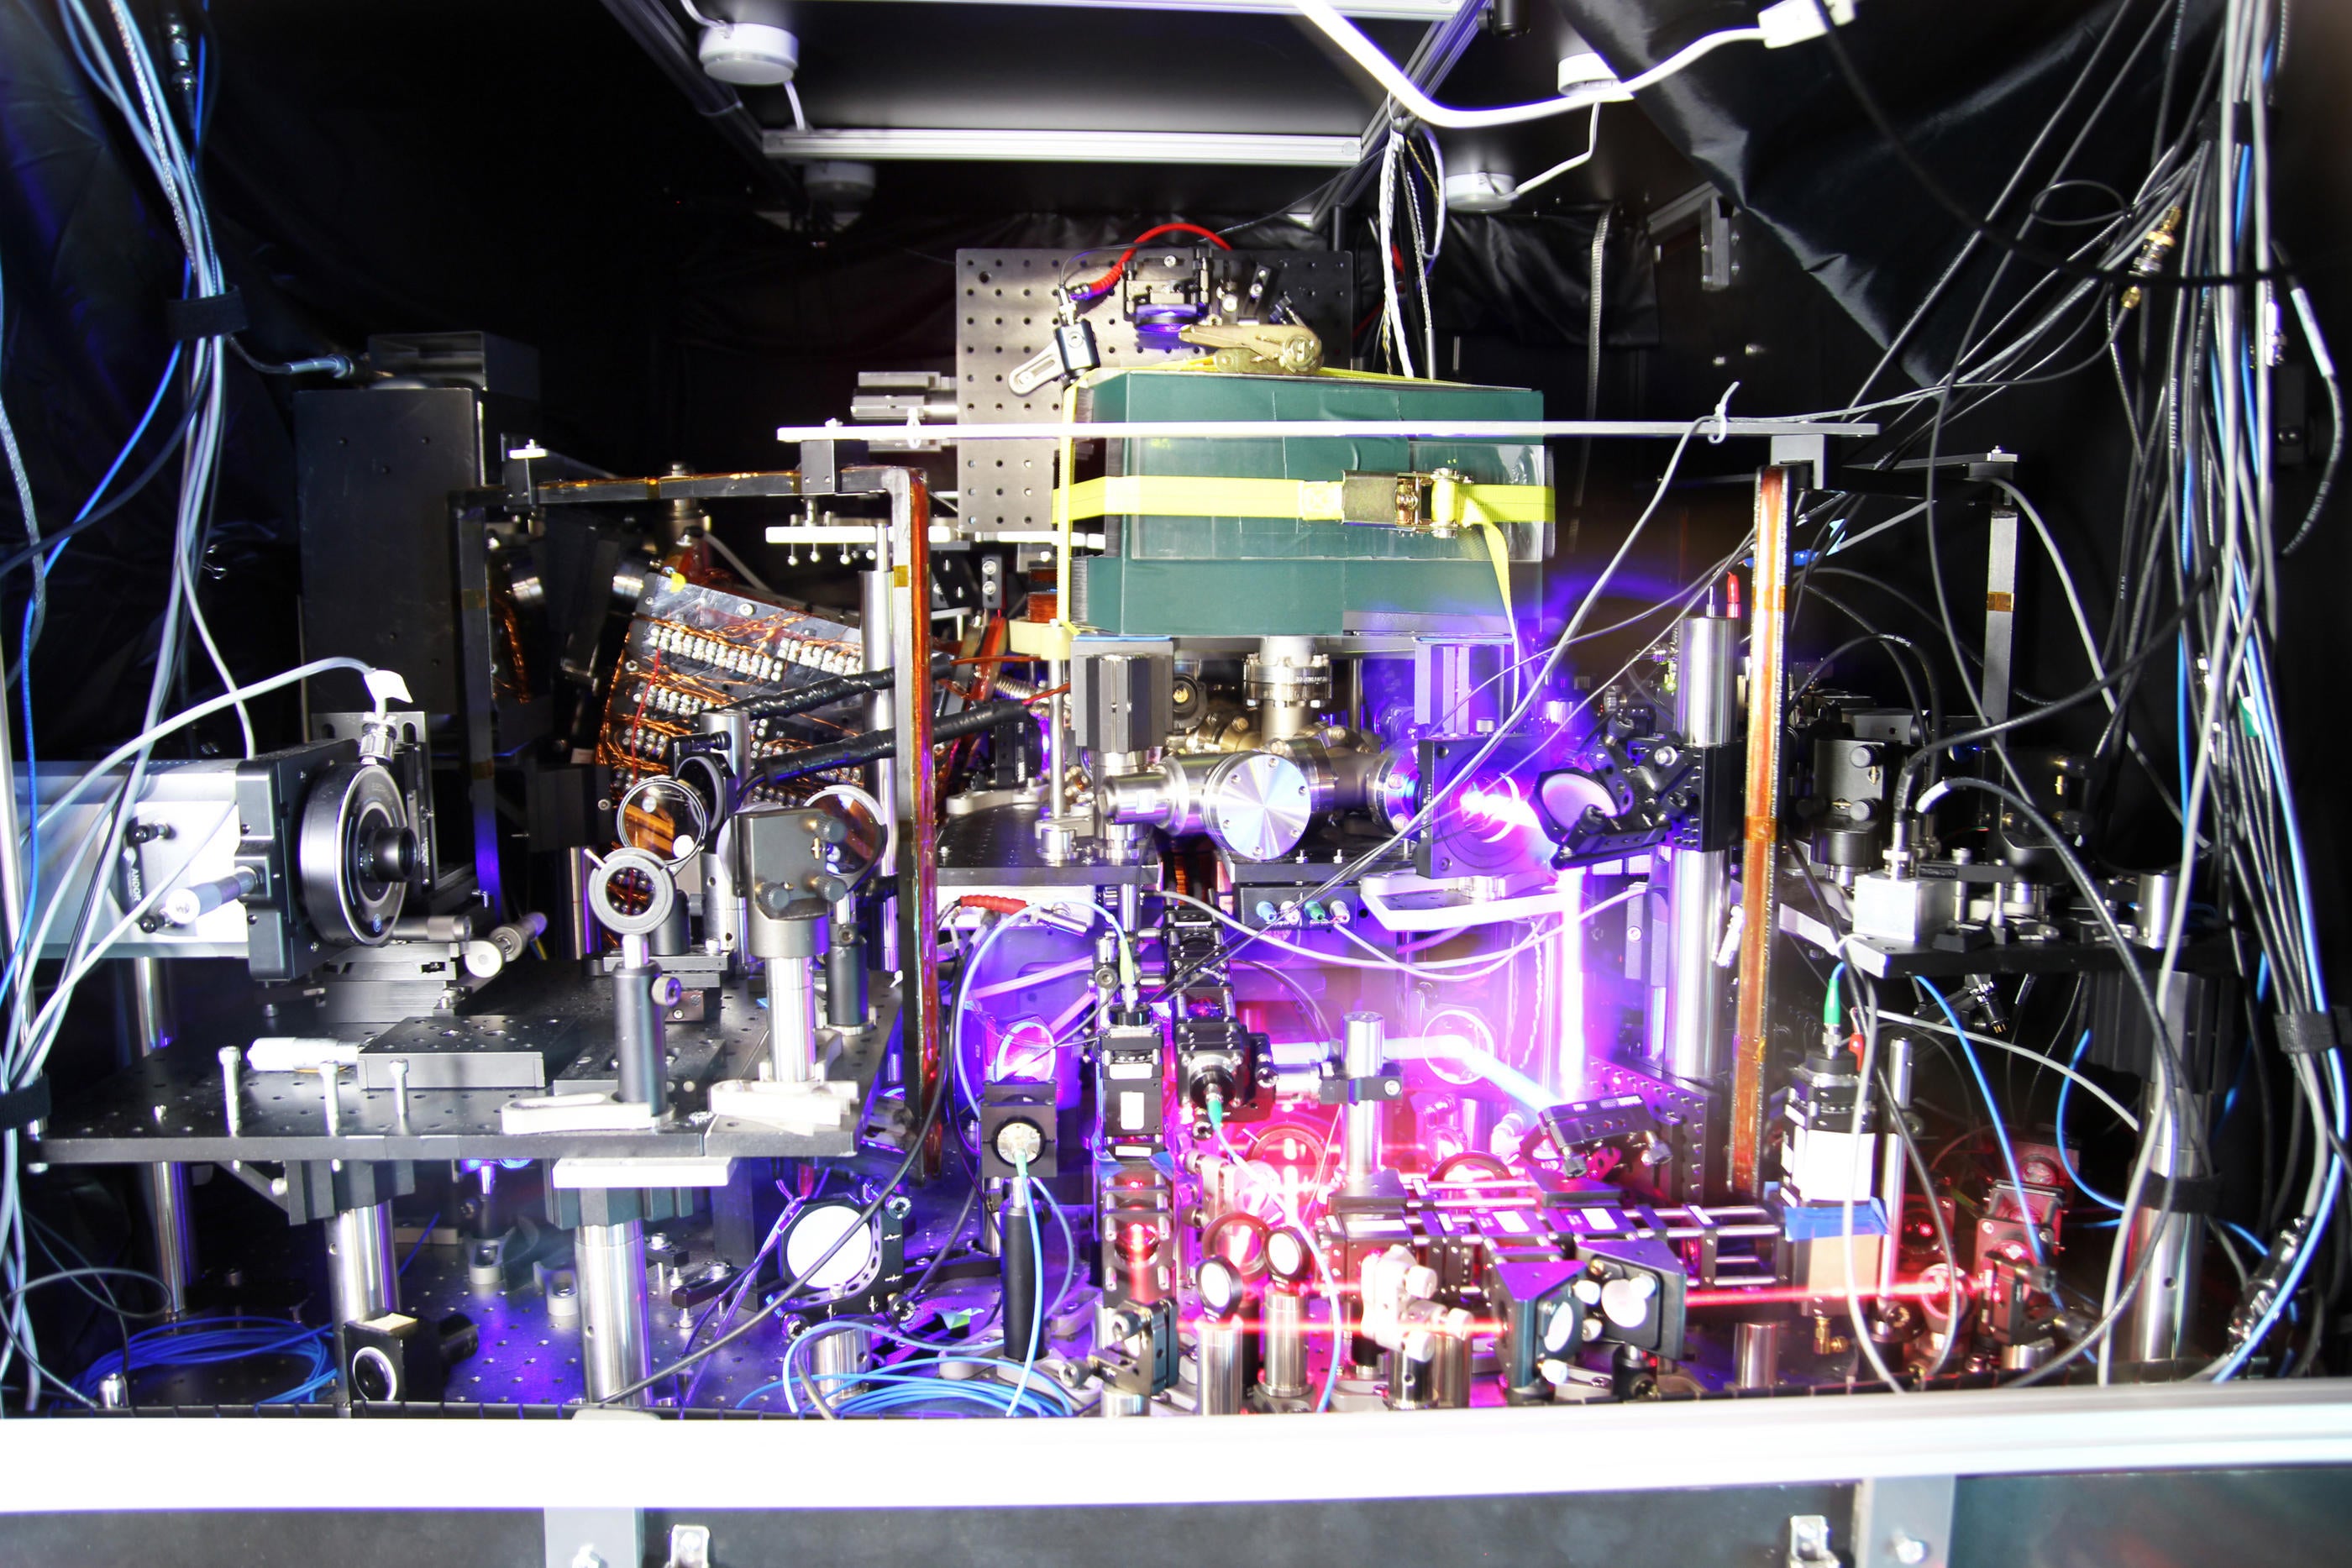 JILA’s experimental atomic clock based on strontium atoms held in a lattice of laser light is the world’s most precise and stable atomic clock. The image is a composite of many photos taken with long exposure times and other techniques to make the lasers more visible.